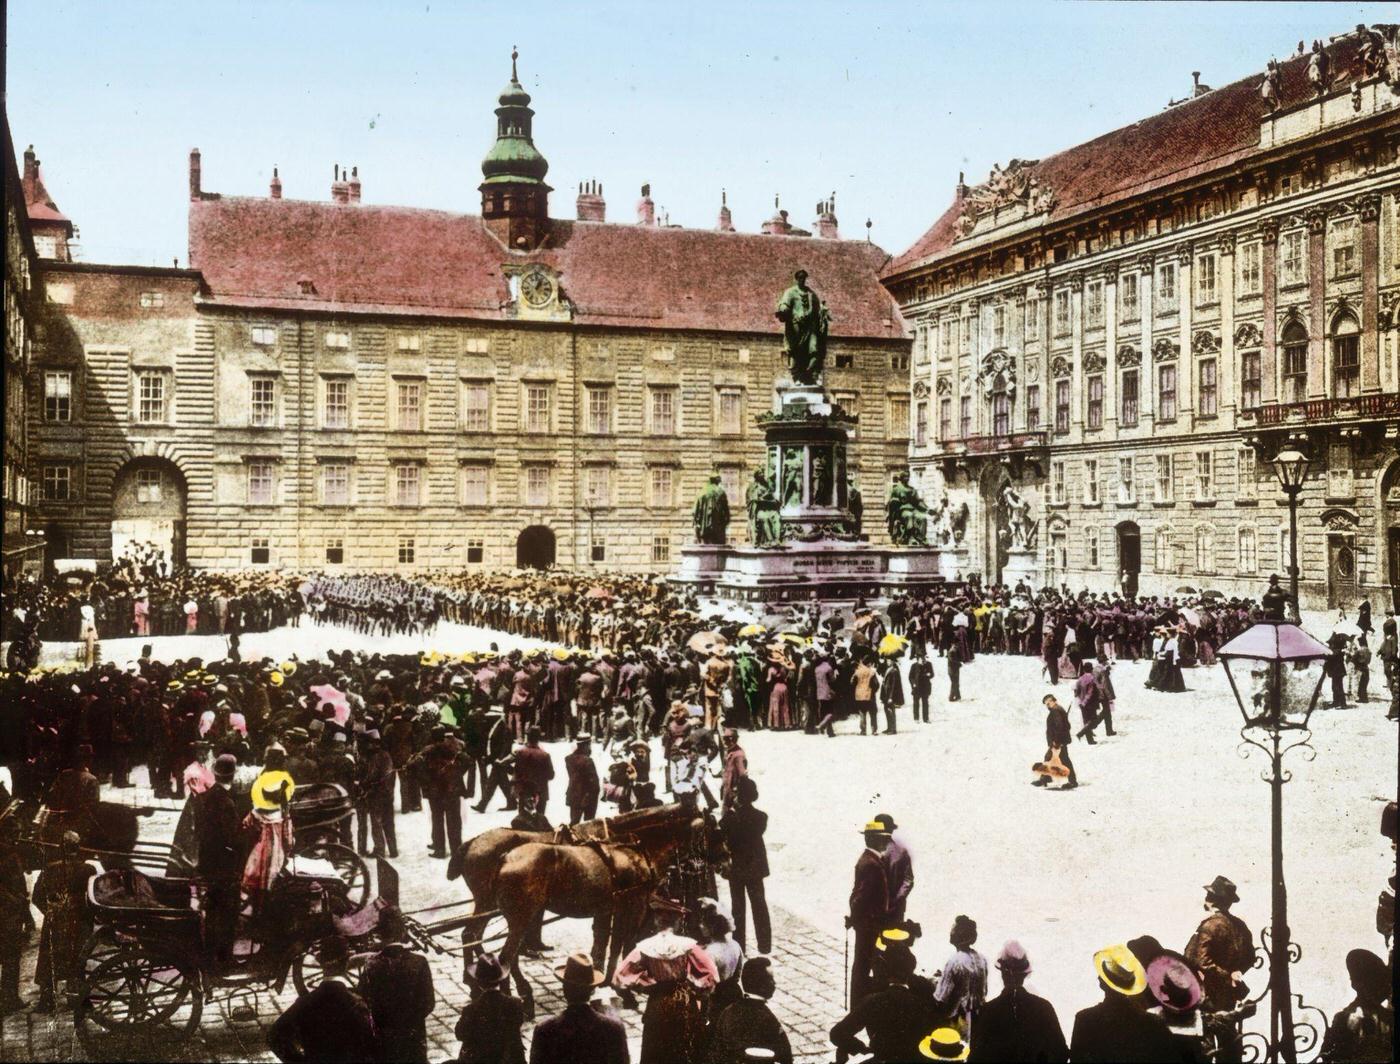 Changing of the guards at the Hofburg Imperial Palace in Vienna, 1905.